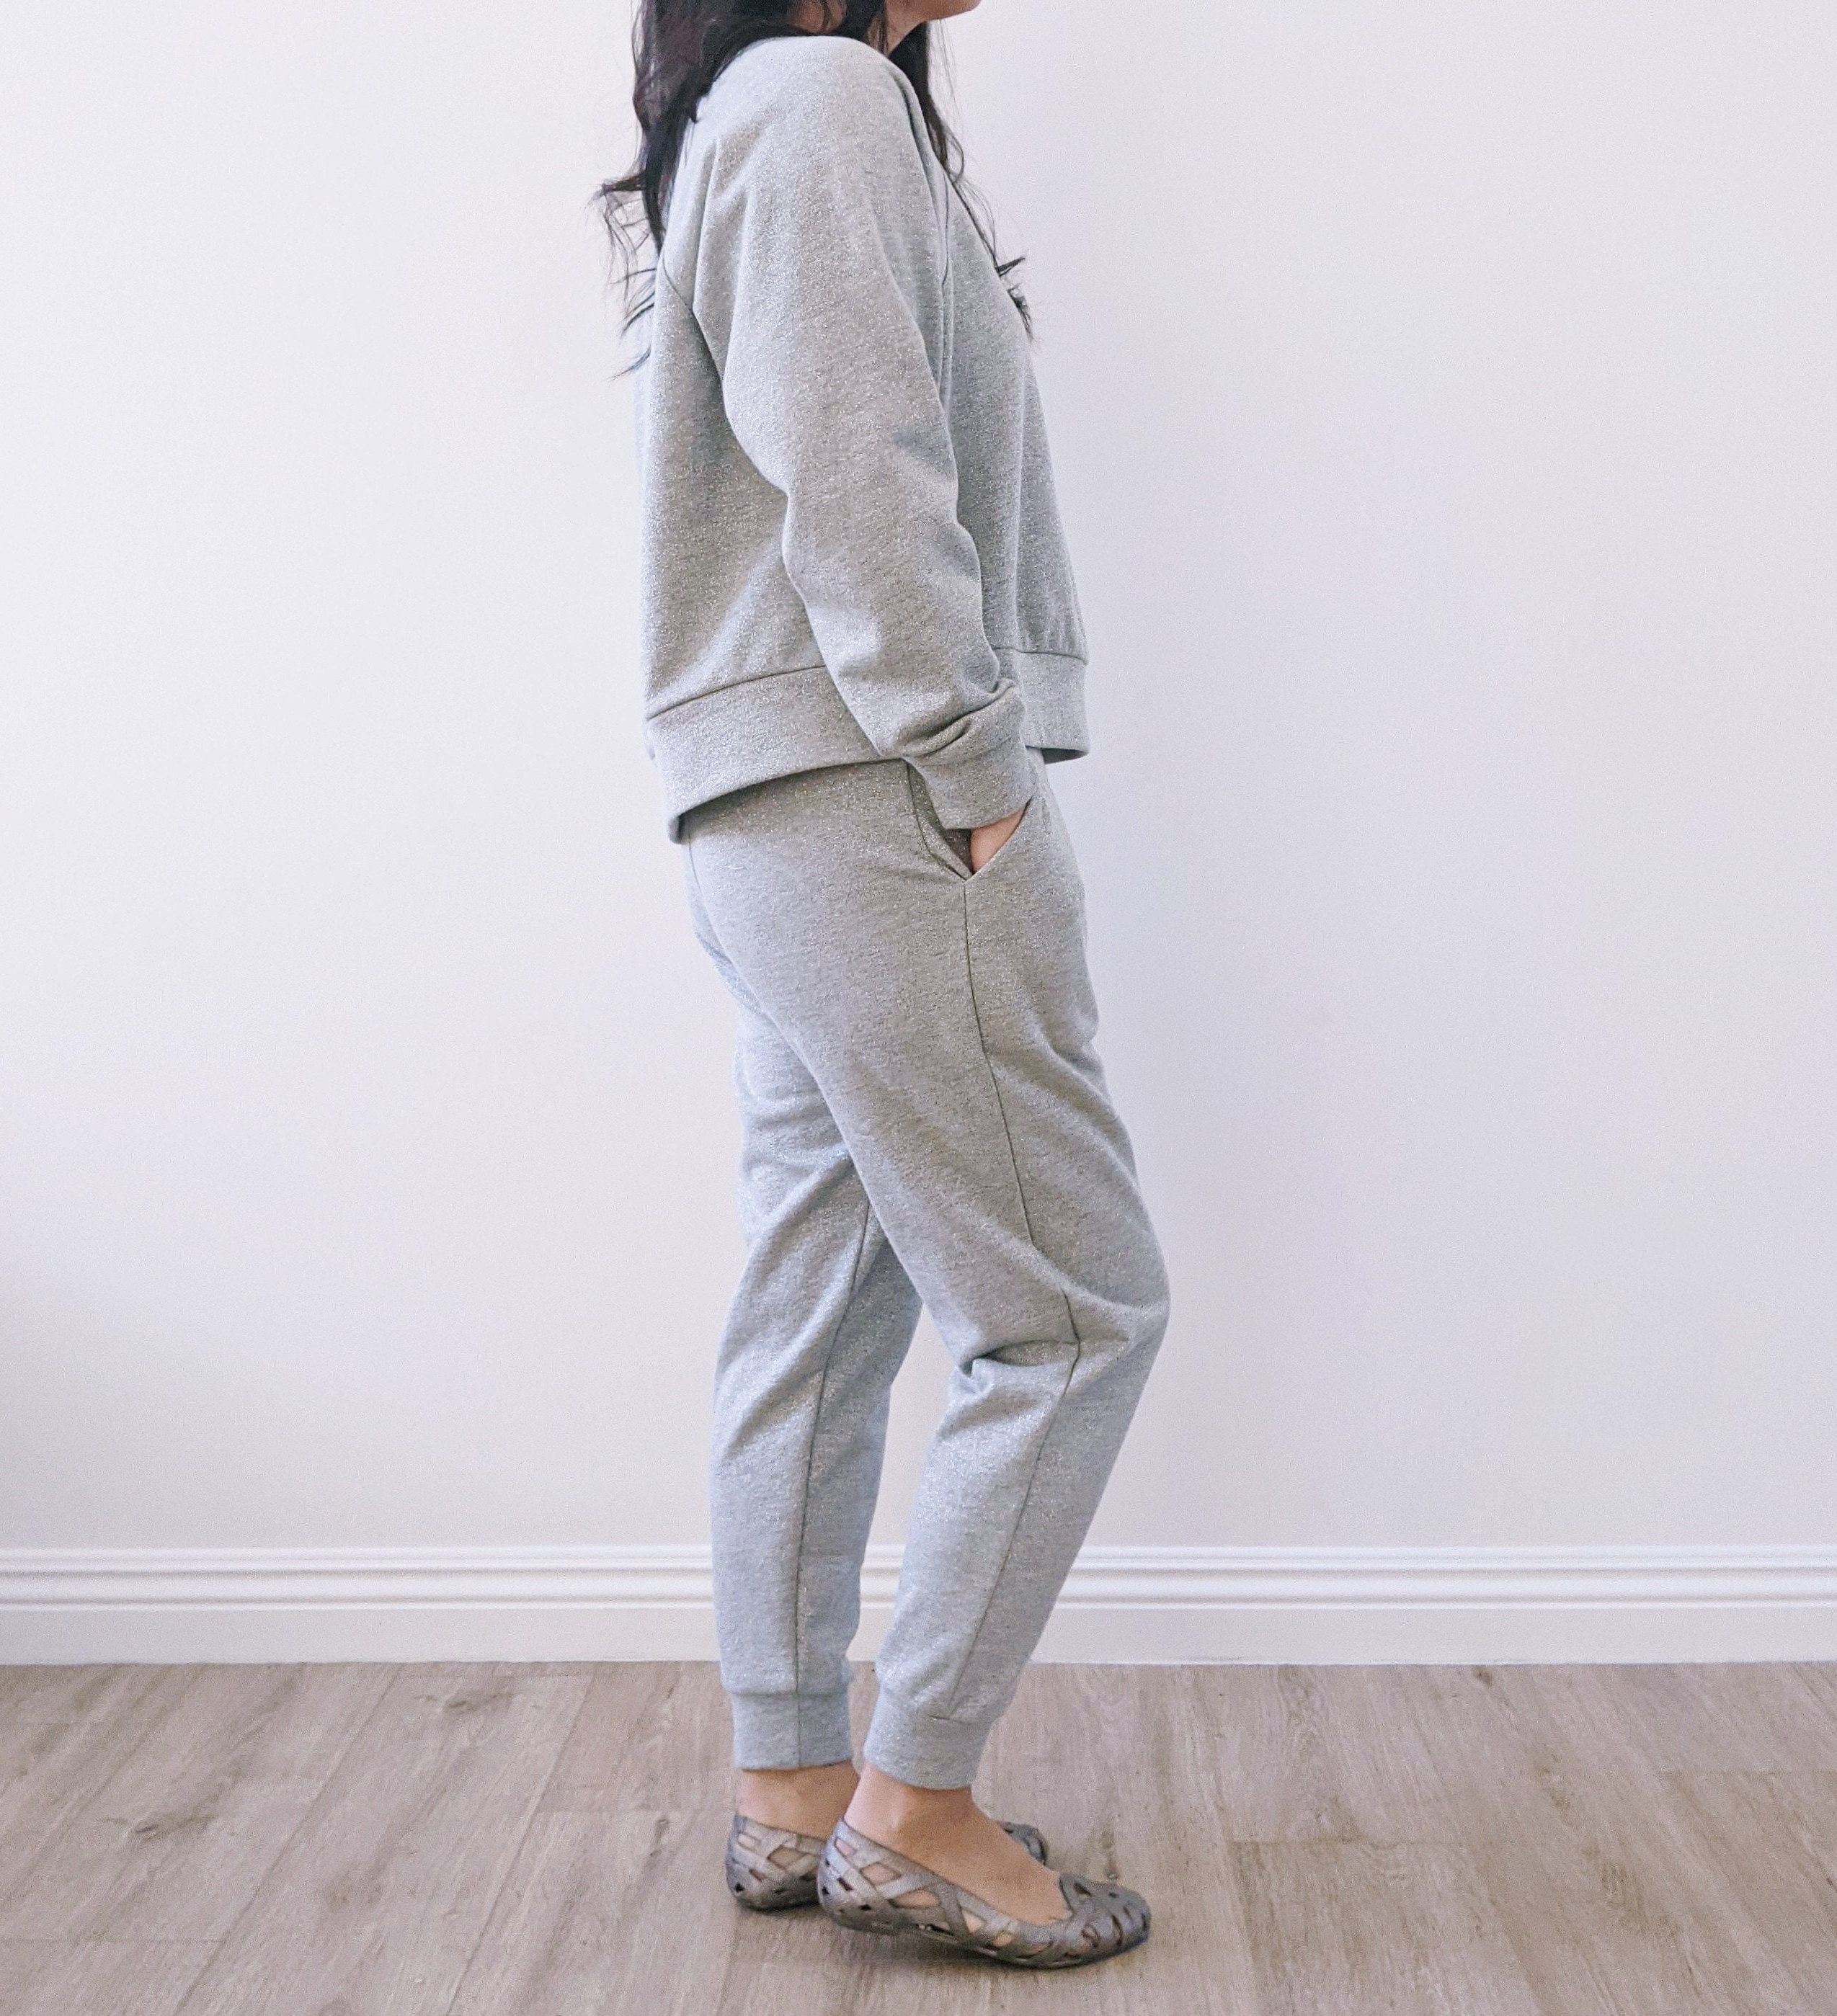 Metallic French Terry Sweatpants with Pockets / Regular or Petite